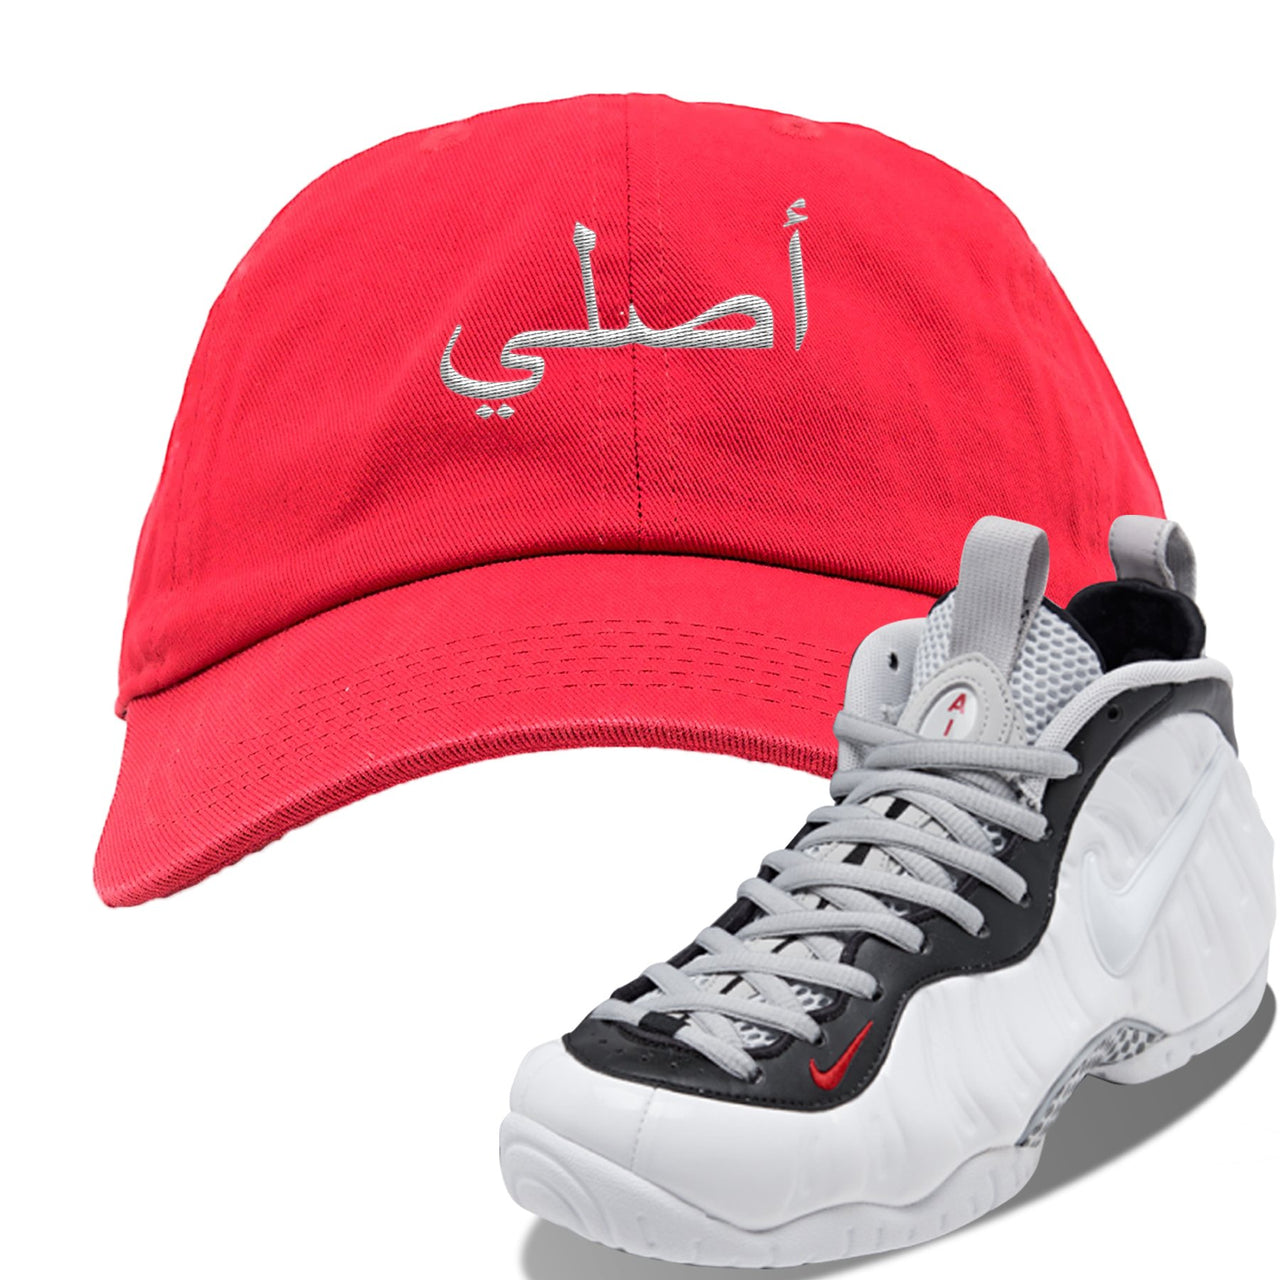 Foamposite Pro White Black University Red Sneaker Red Dad Hat | Hat to match Nike Air Foamposite Pro White Black University Red Shoes | Original Arabic